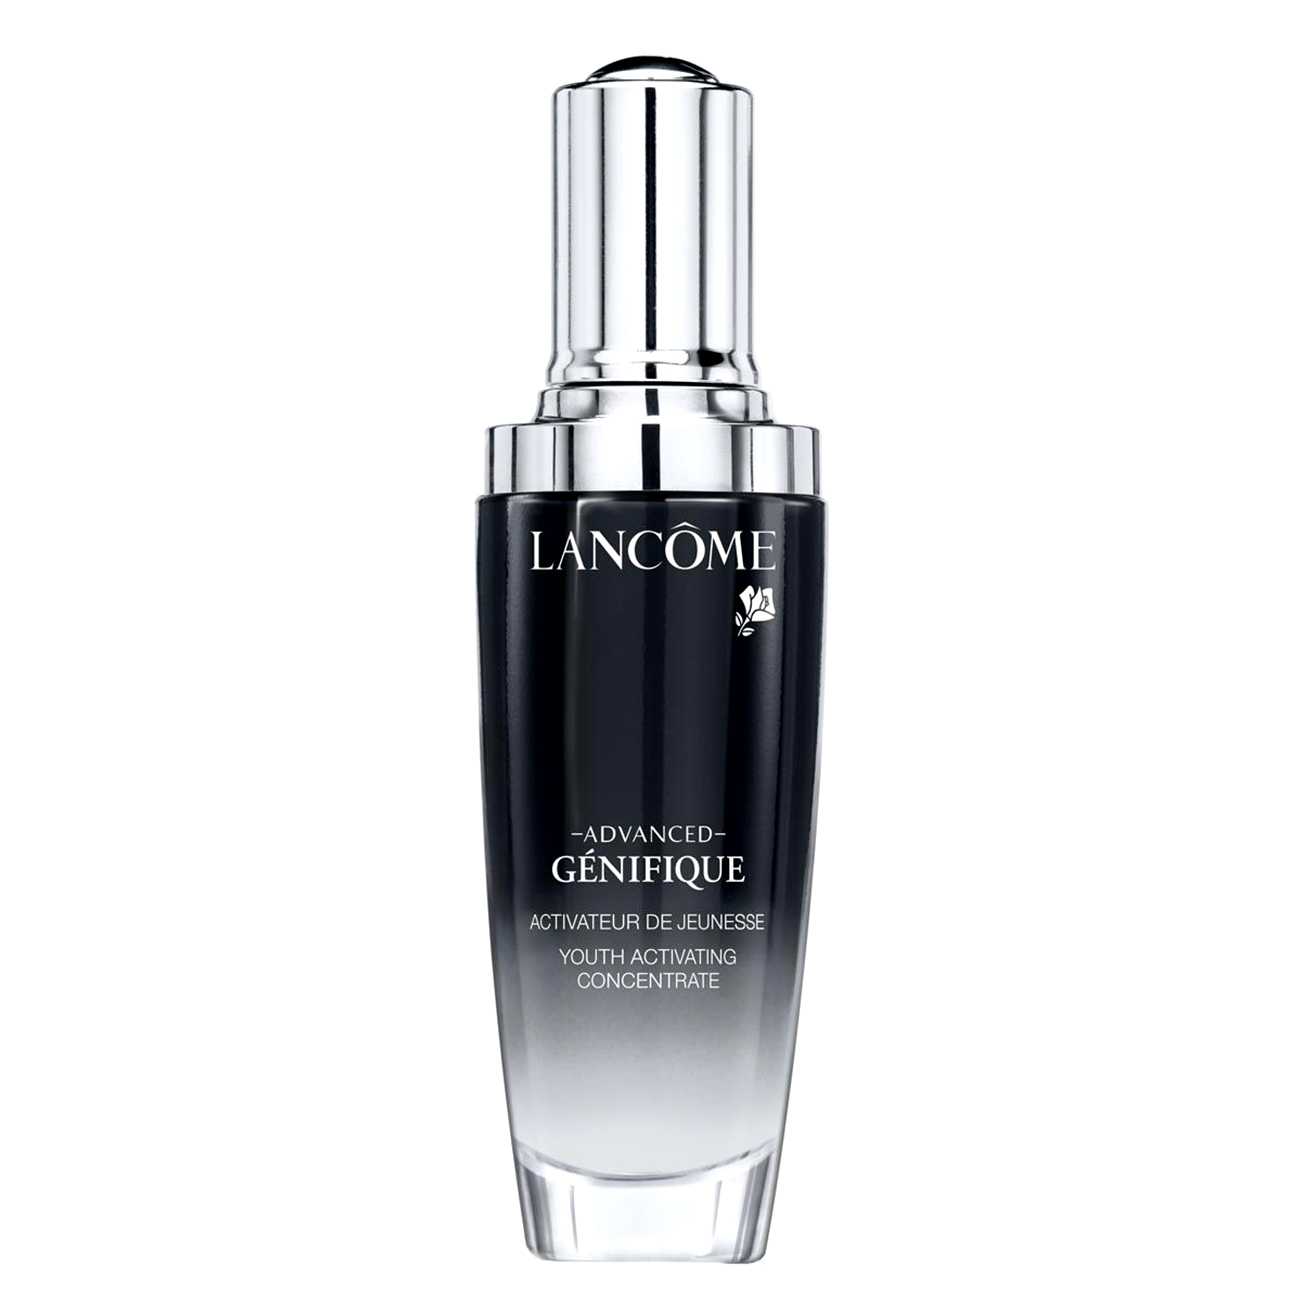 GENIFIQUE YOUTH ACTIVATING CONCENTRATE 100 ML bestvalue.eu